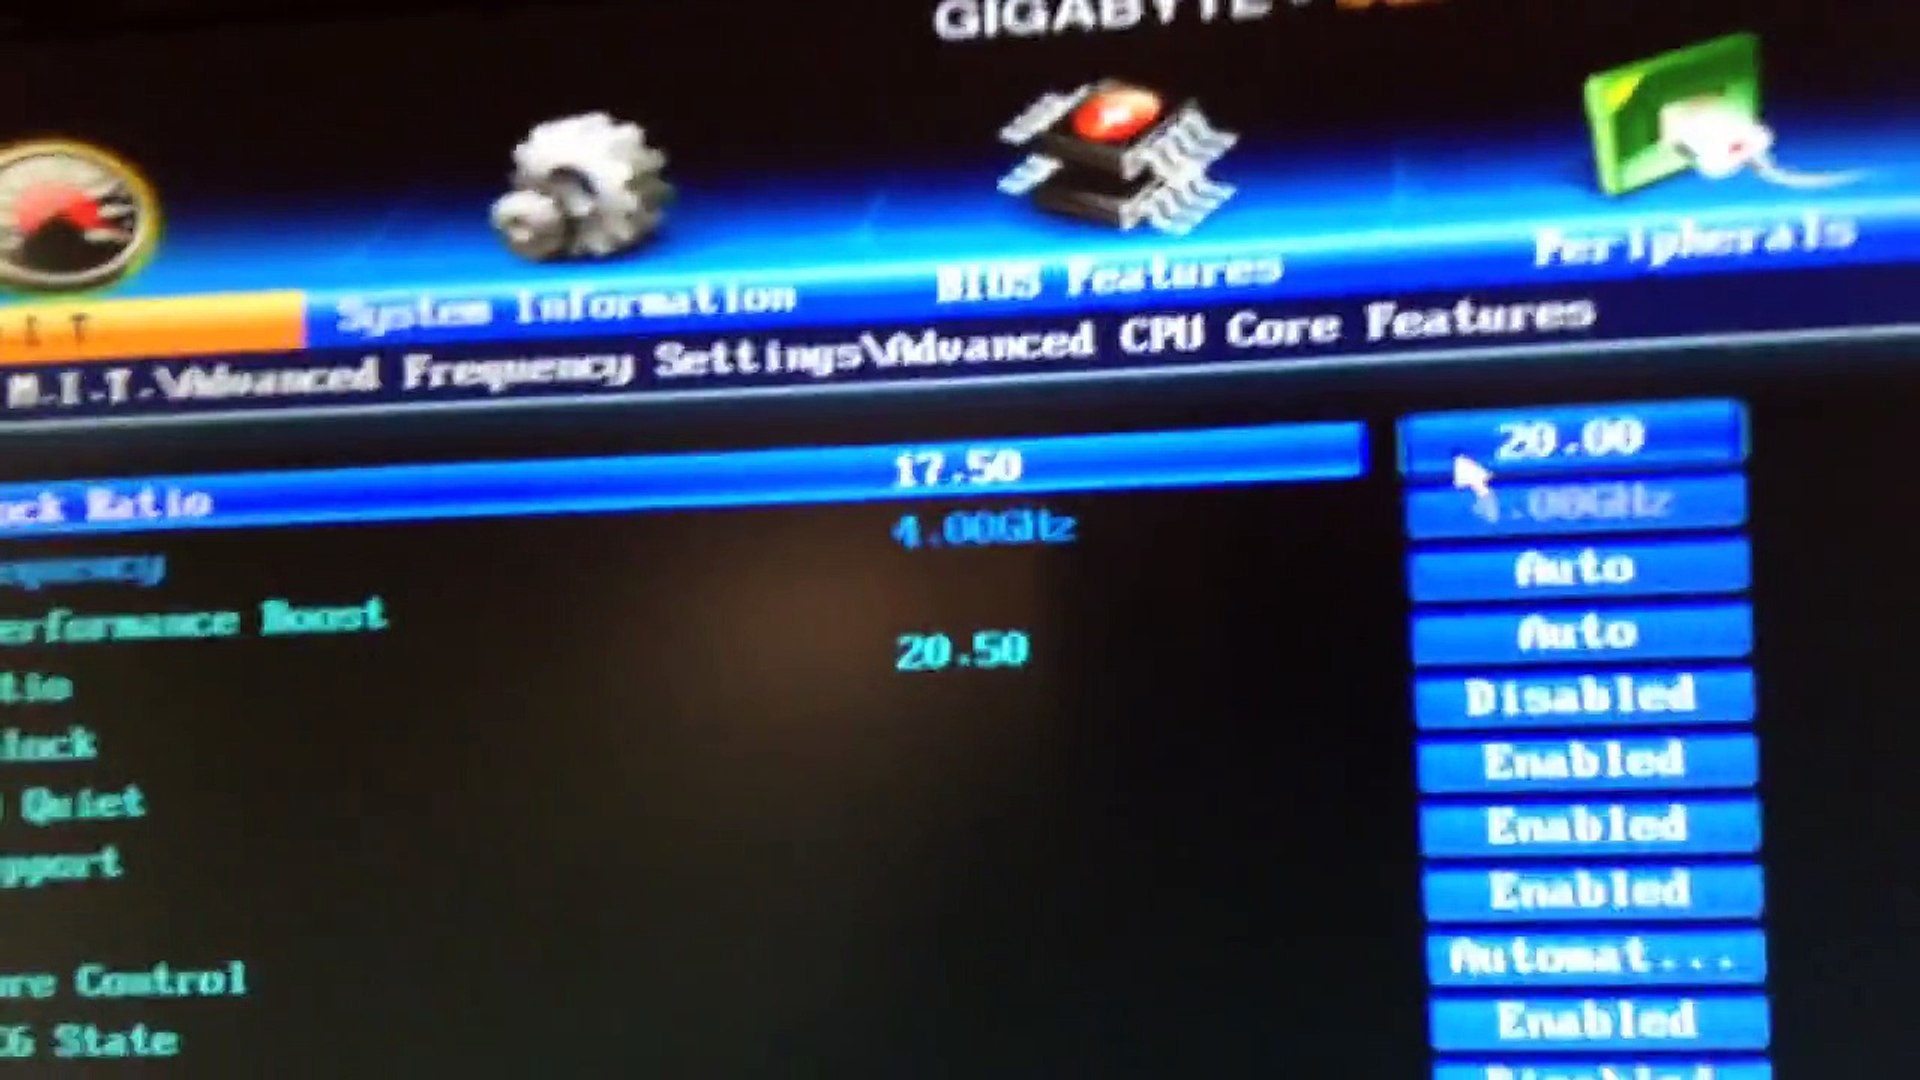 How To Overclock Your Cpu Fx 6300 With A Gigabyte Motherboard Video Dailymotion